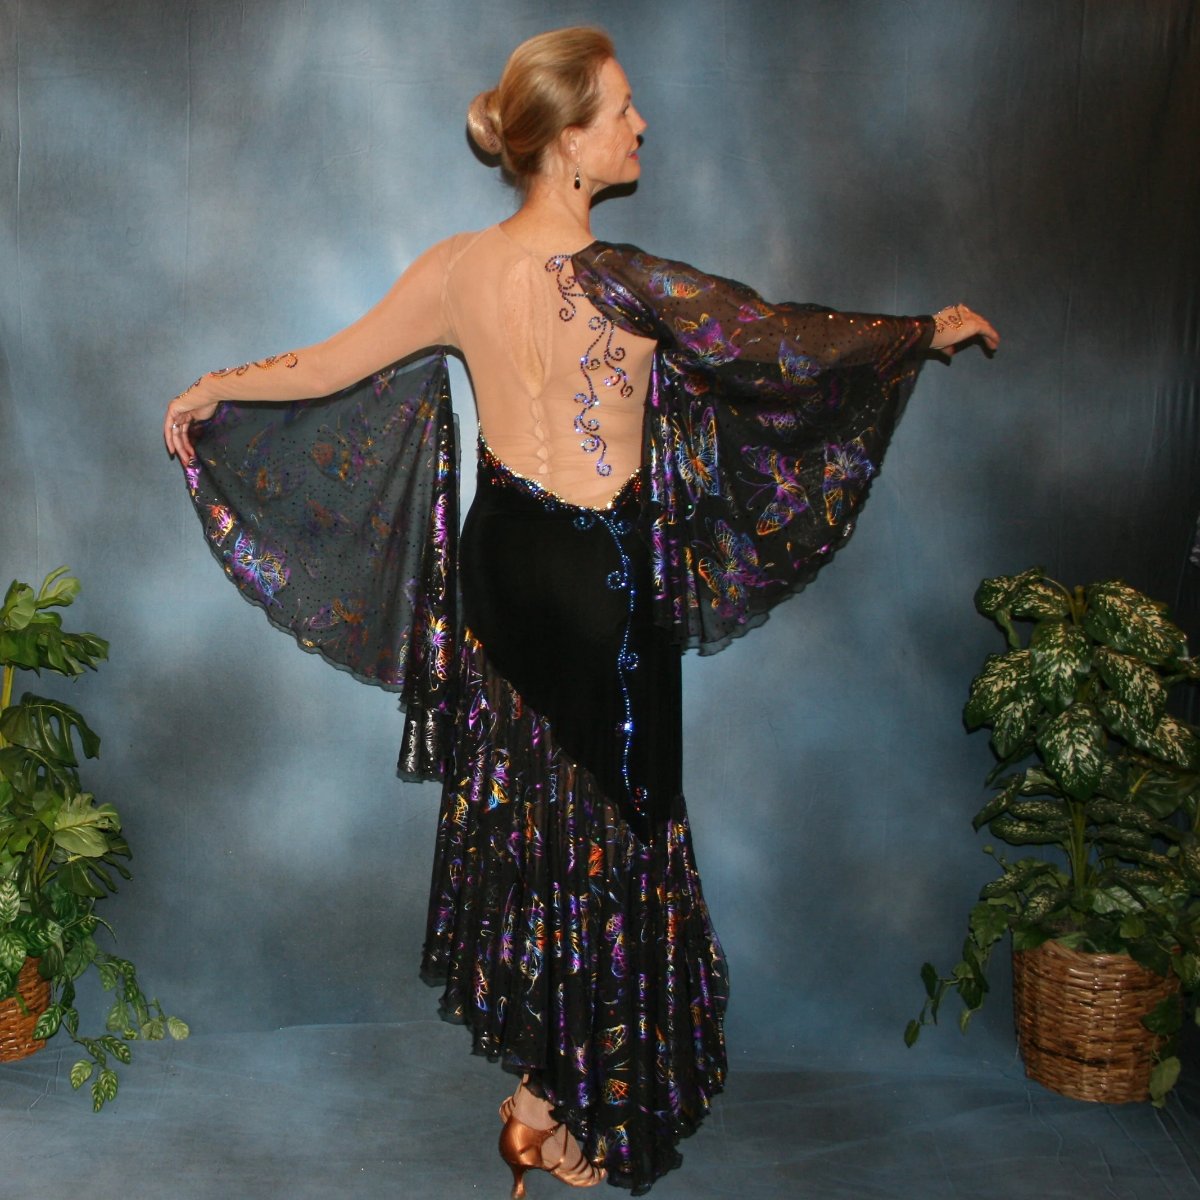 back view of Black tango dress created of black luxurious solid slinky artistically patterned out on a nude illusion base, this dramatic dress design features hologram butterfly print flounces & floats. Crystal Meridian Blue Swarovski rhinestones embellish in detail to finish.